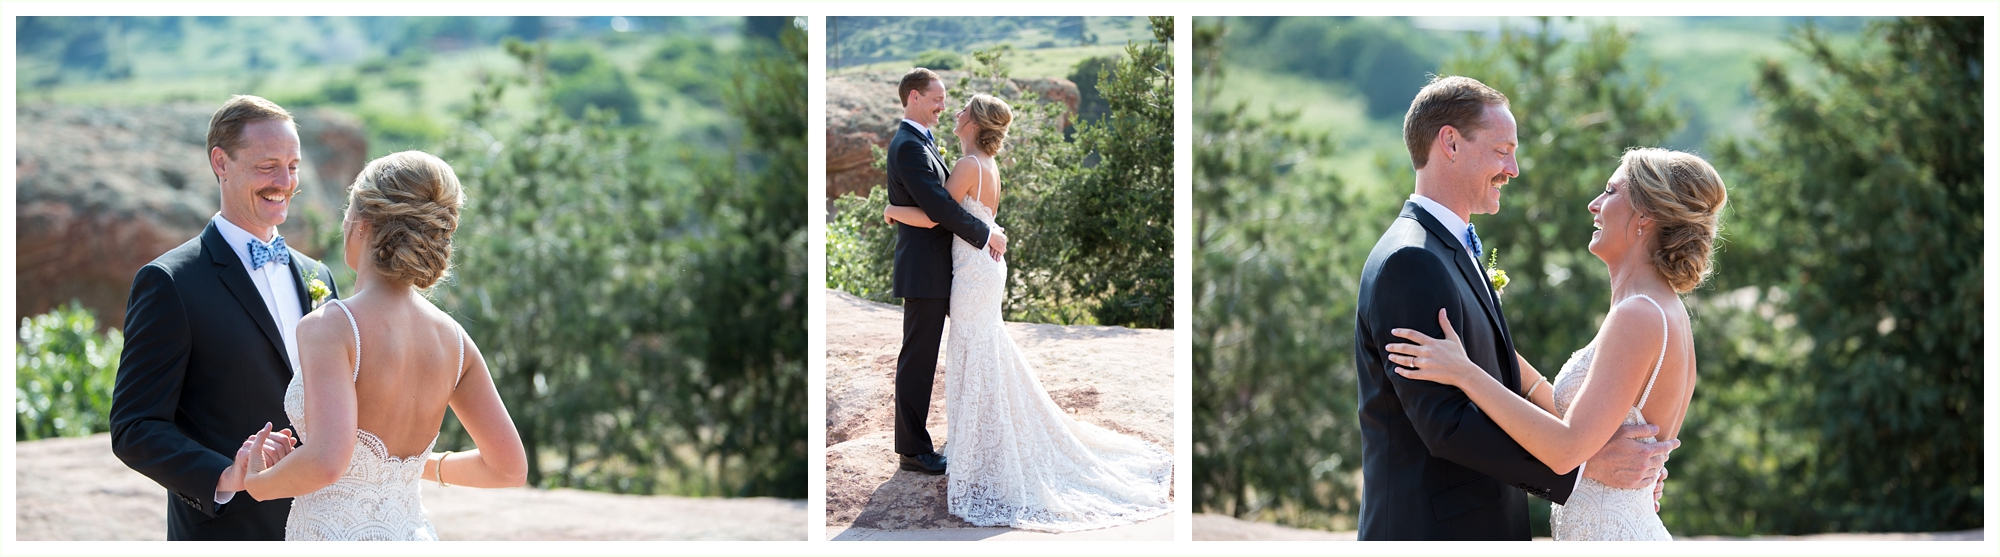 bride and groom share first look during colorado mountain wedding